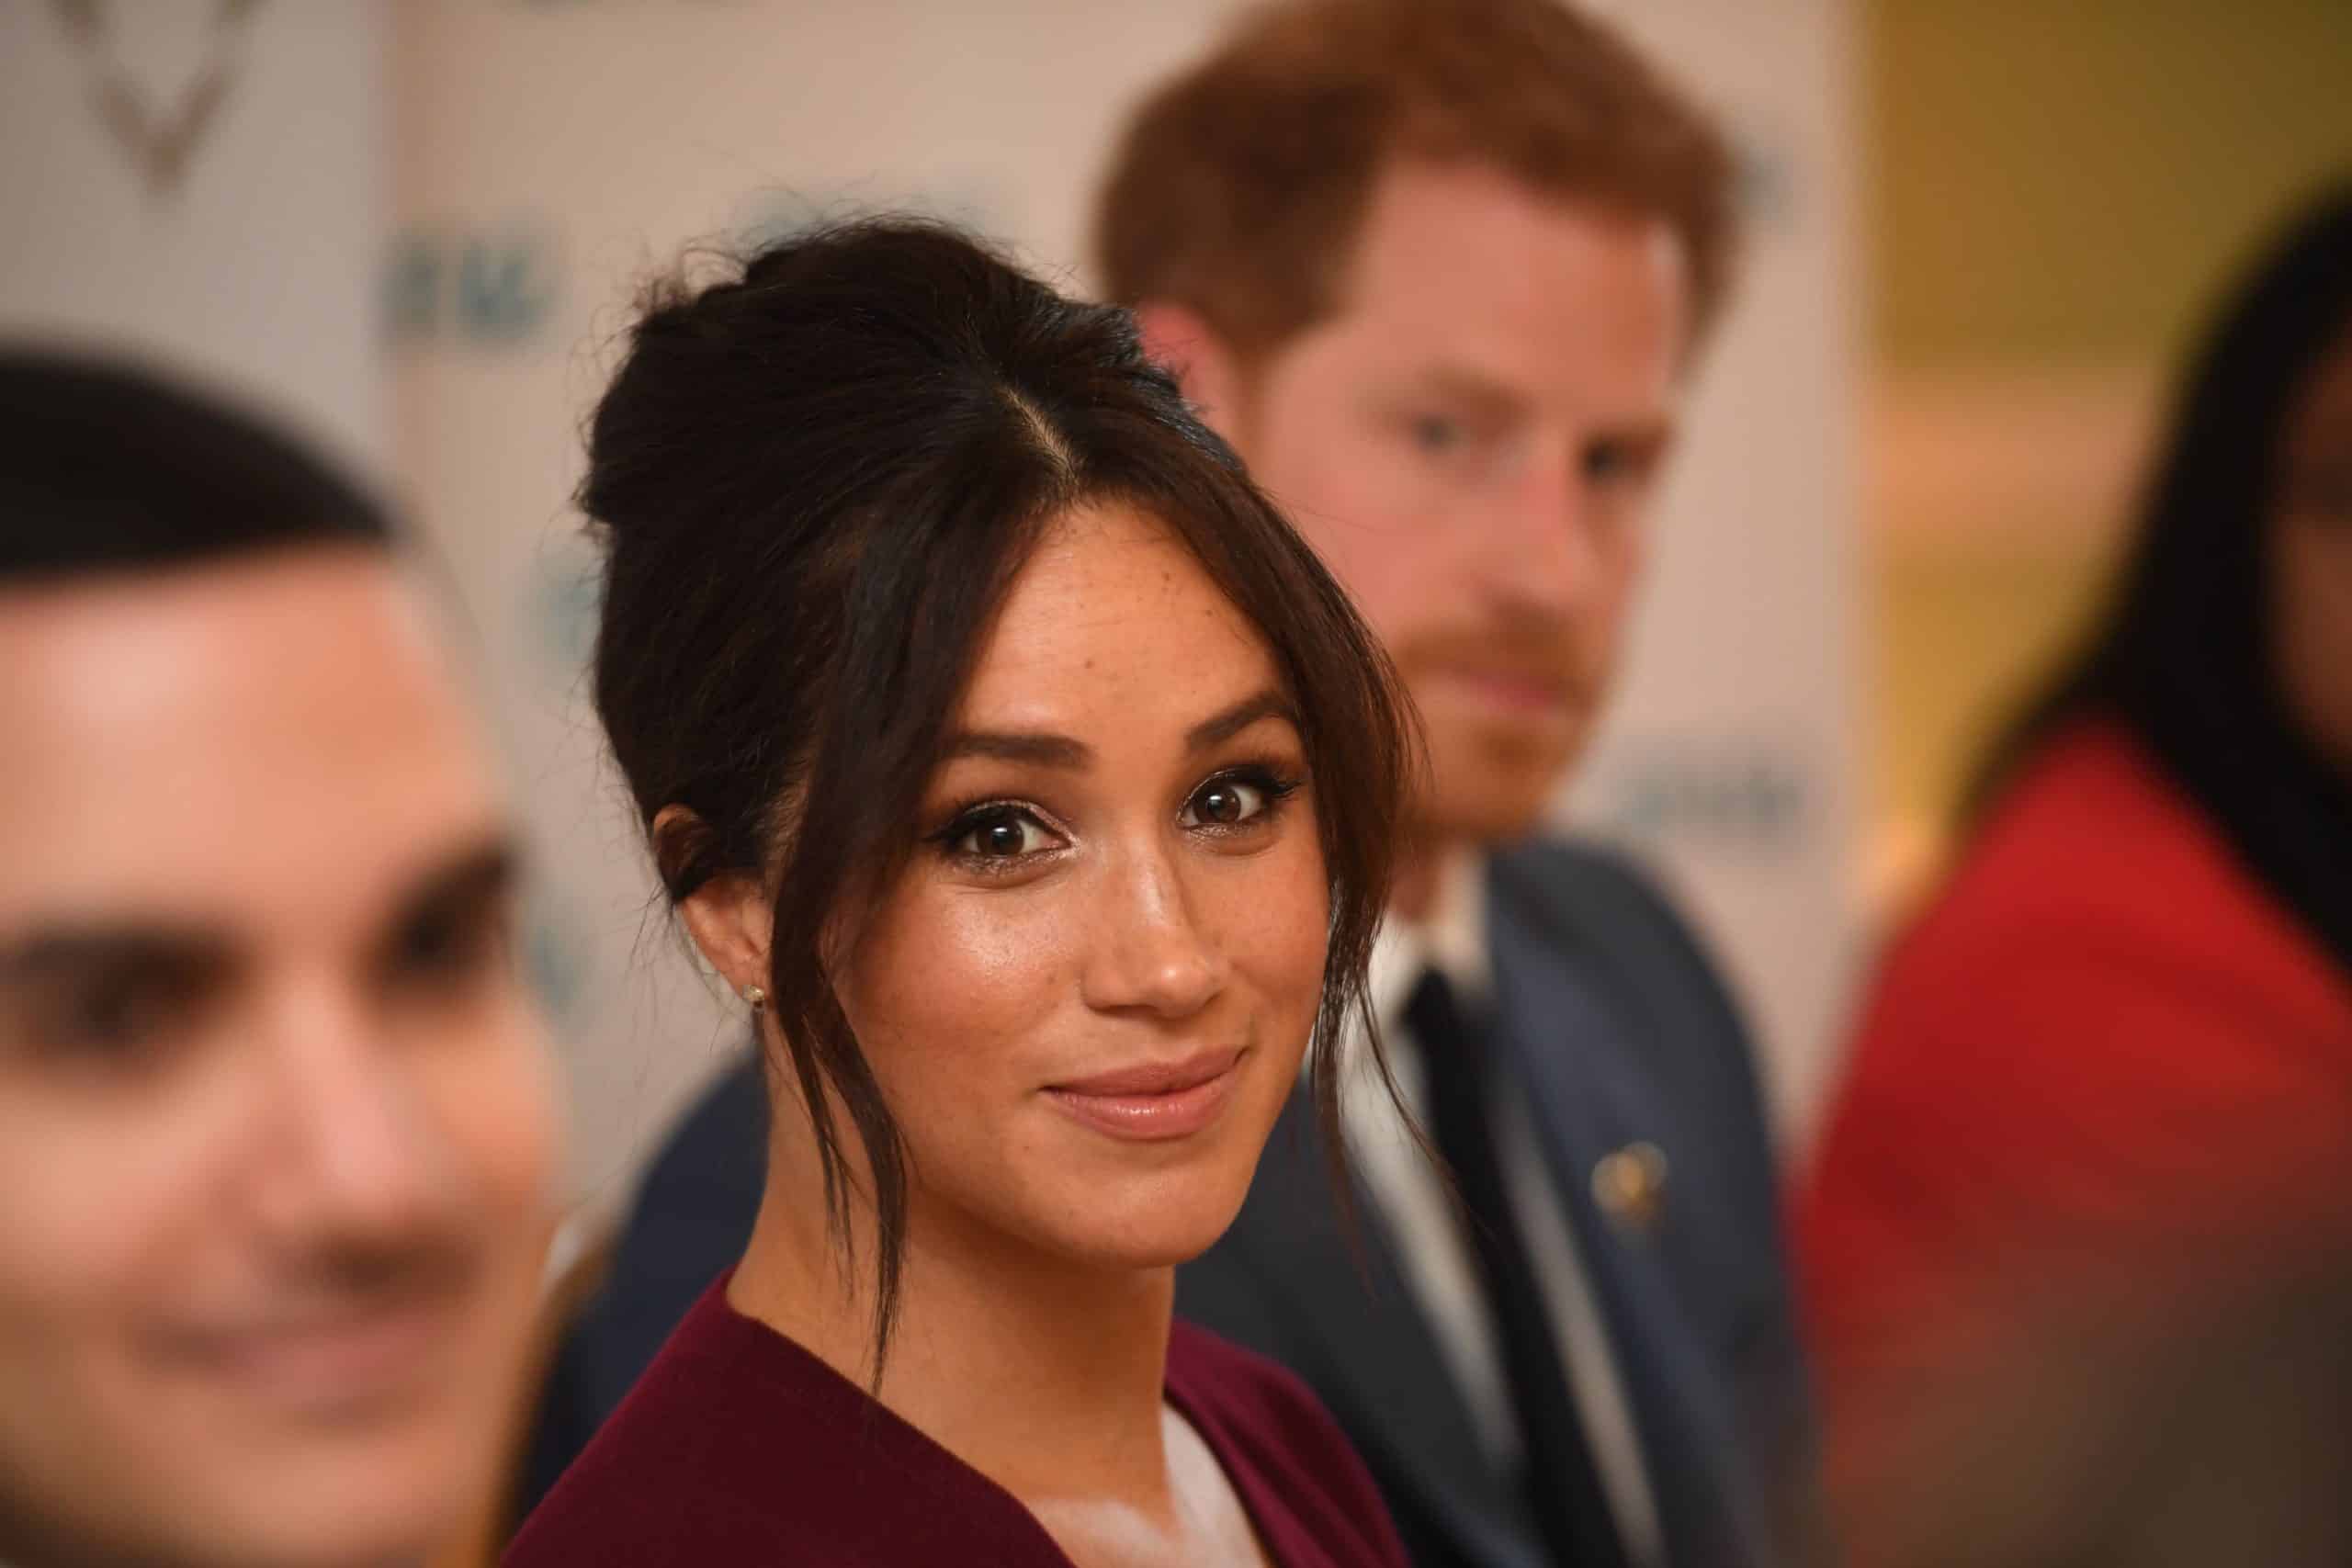 WATCH: Meghan Markle’s racism claims ‘validated’ after resignation